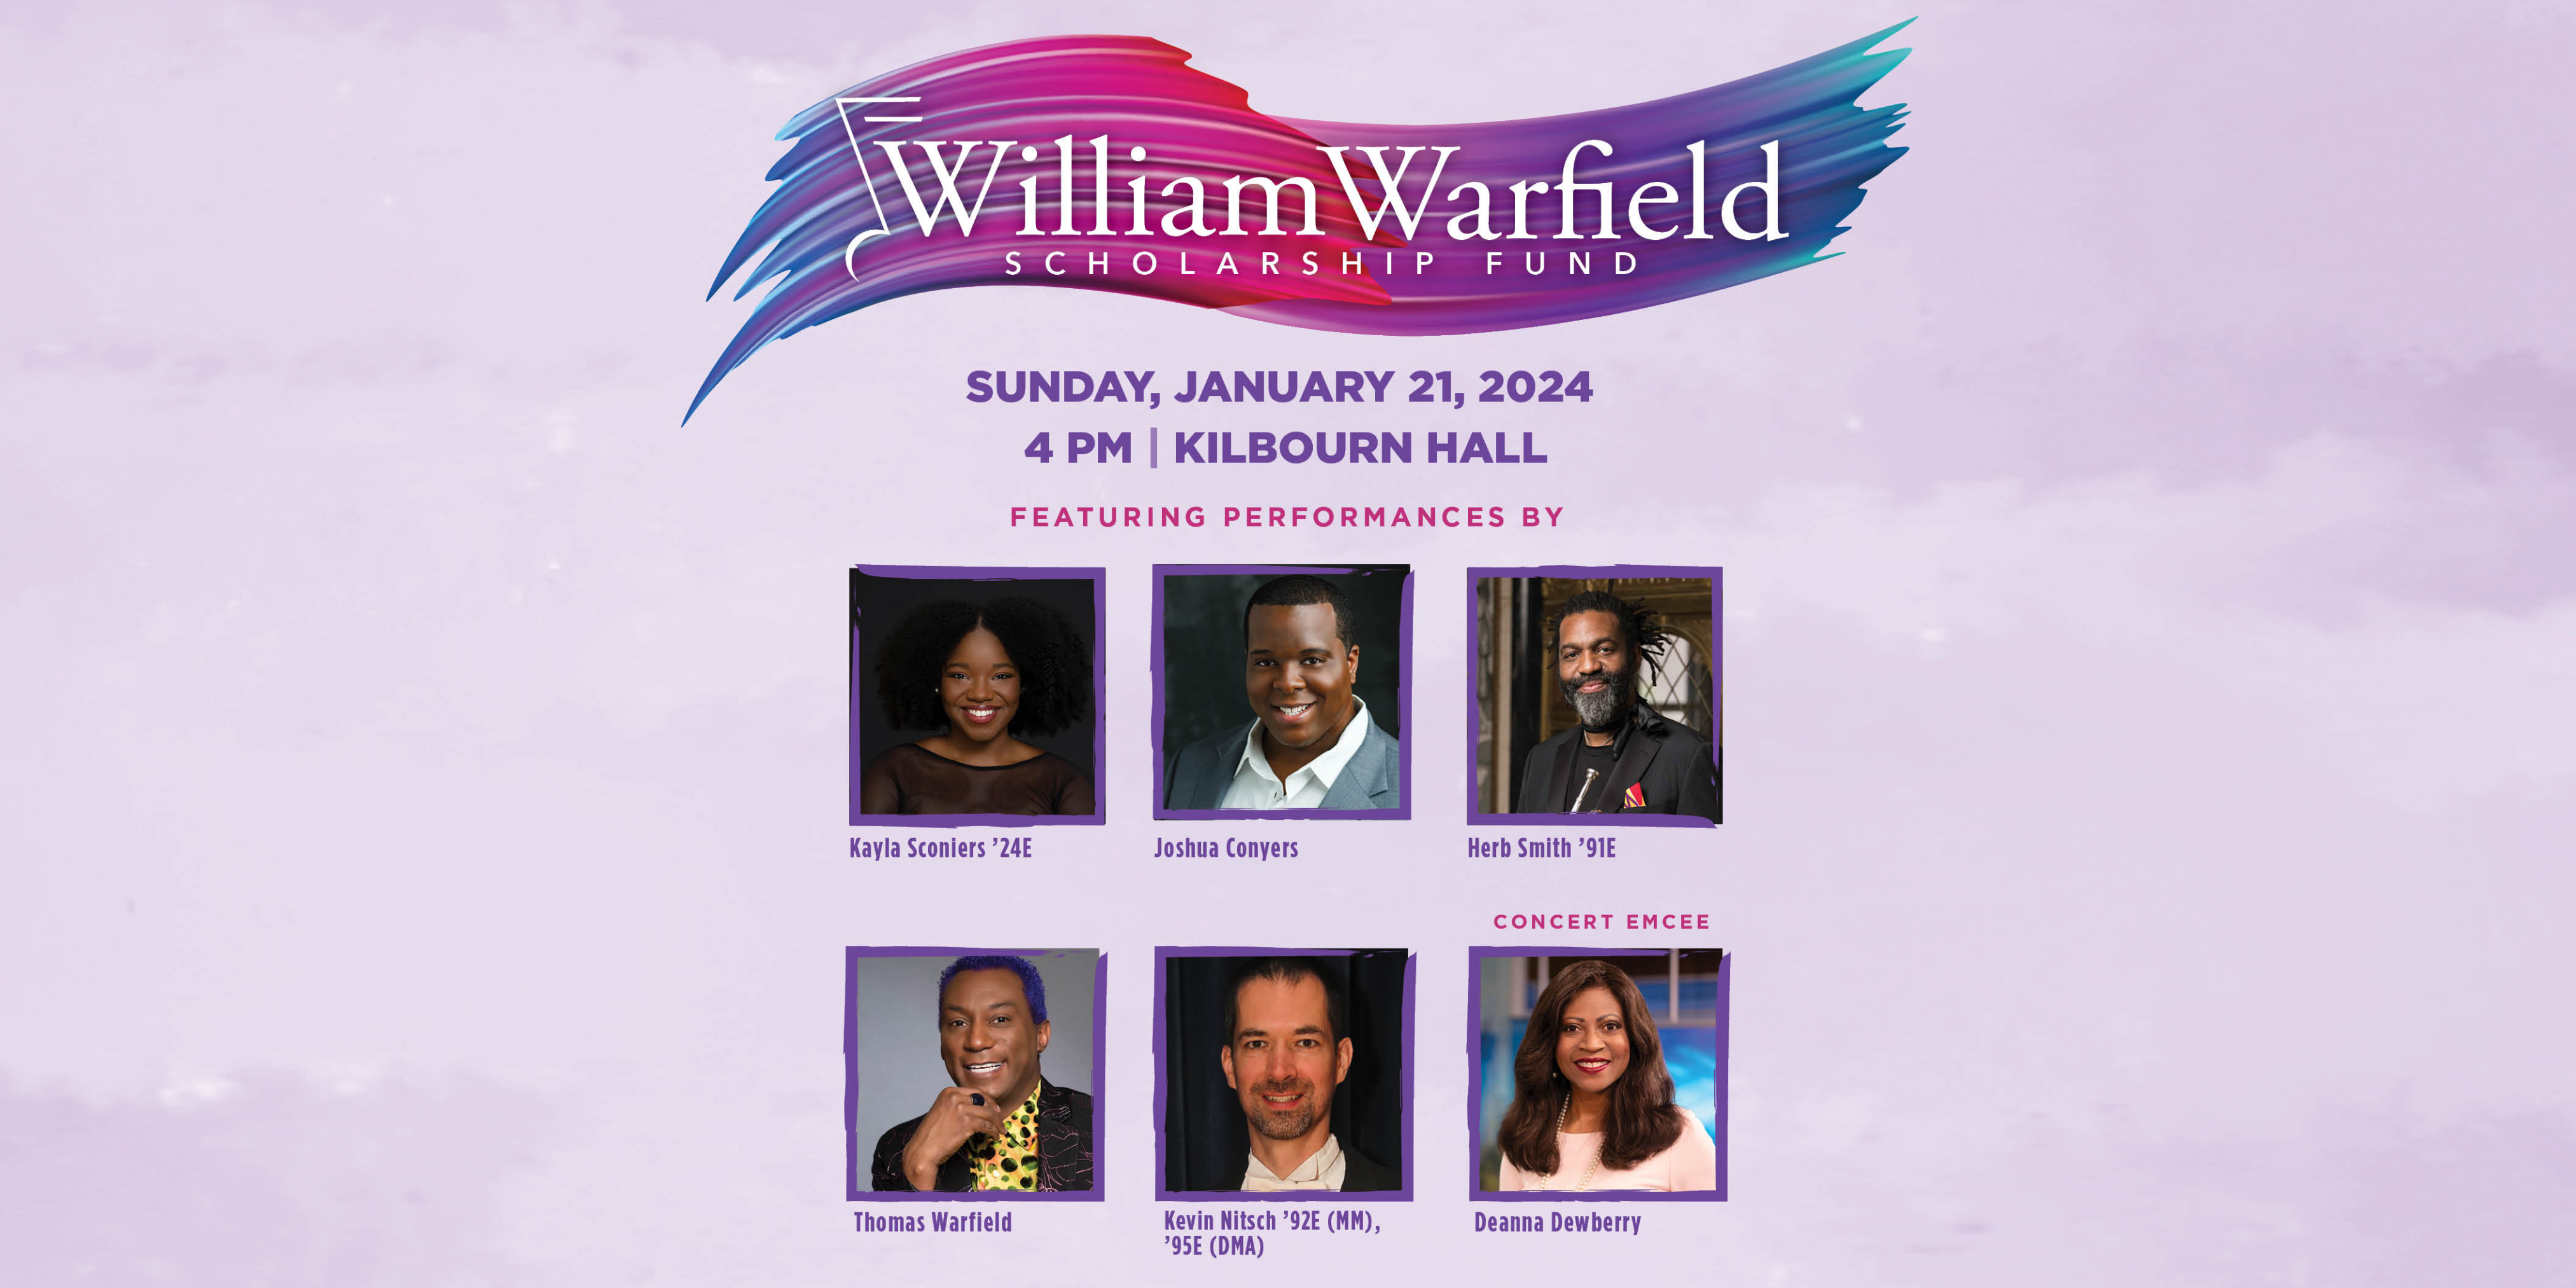 William Warfield Scholarship Fund 2024 Benefit Concert A Cast In History Featuring Kayla Sconiers 24e Eastman School Of Music